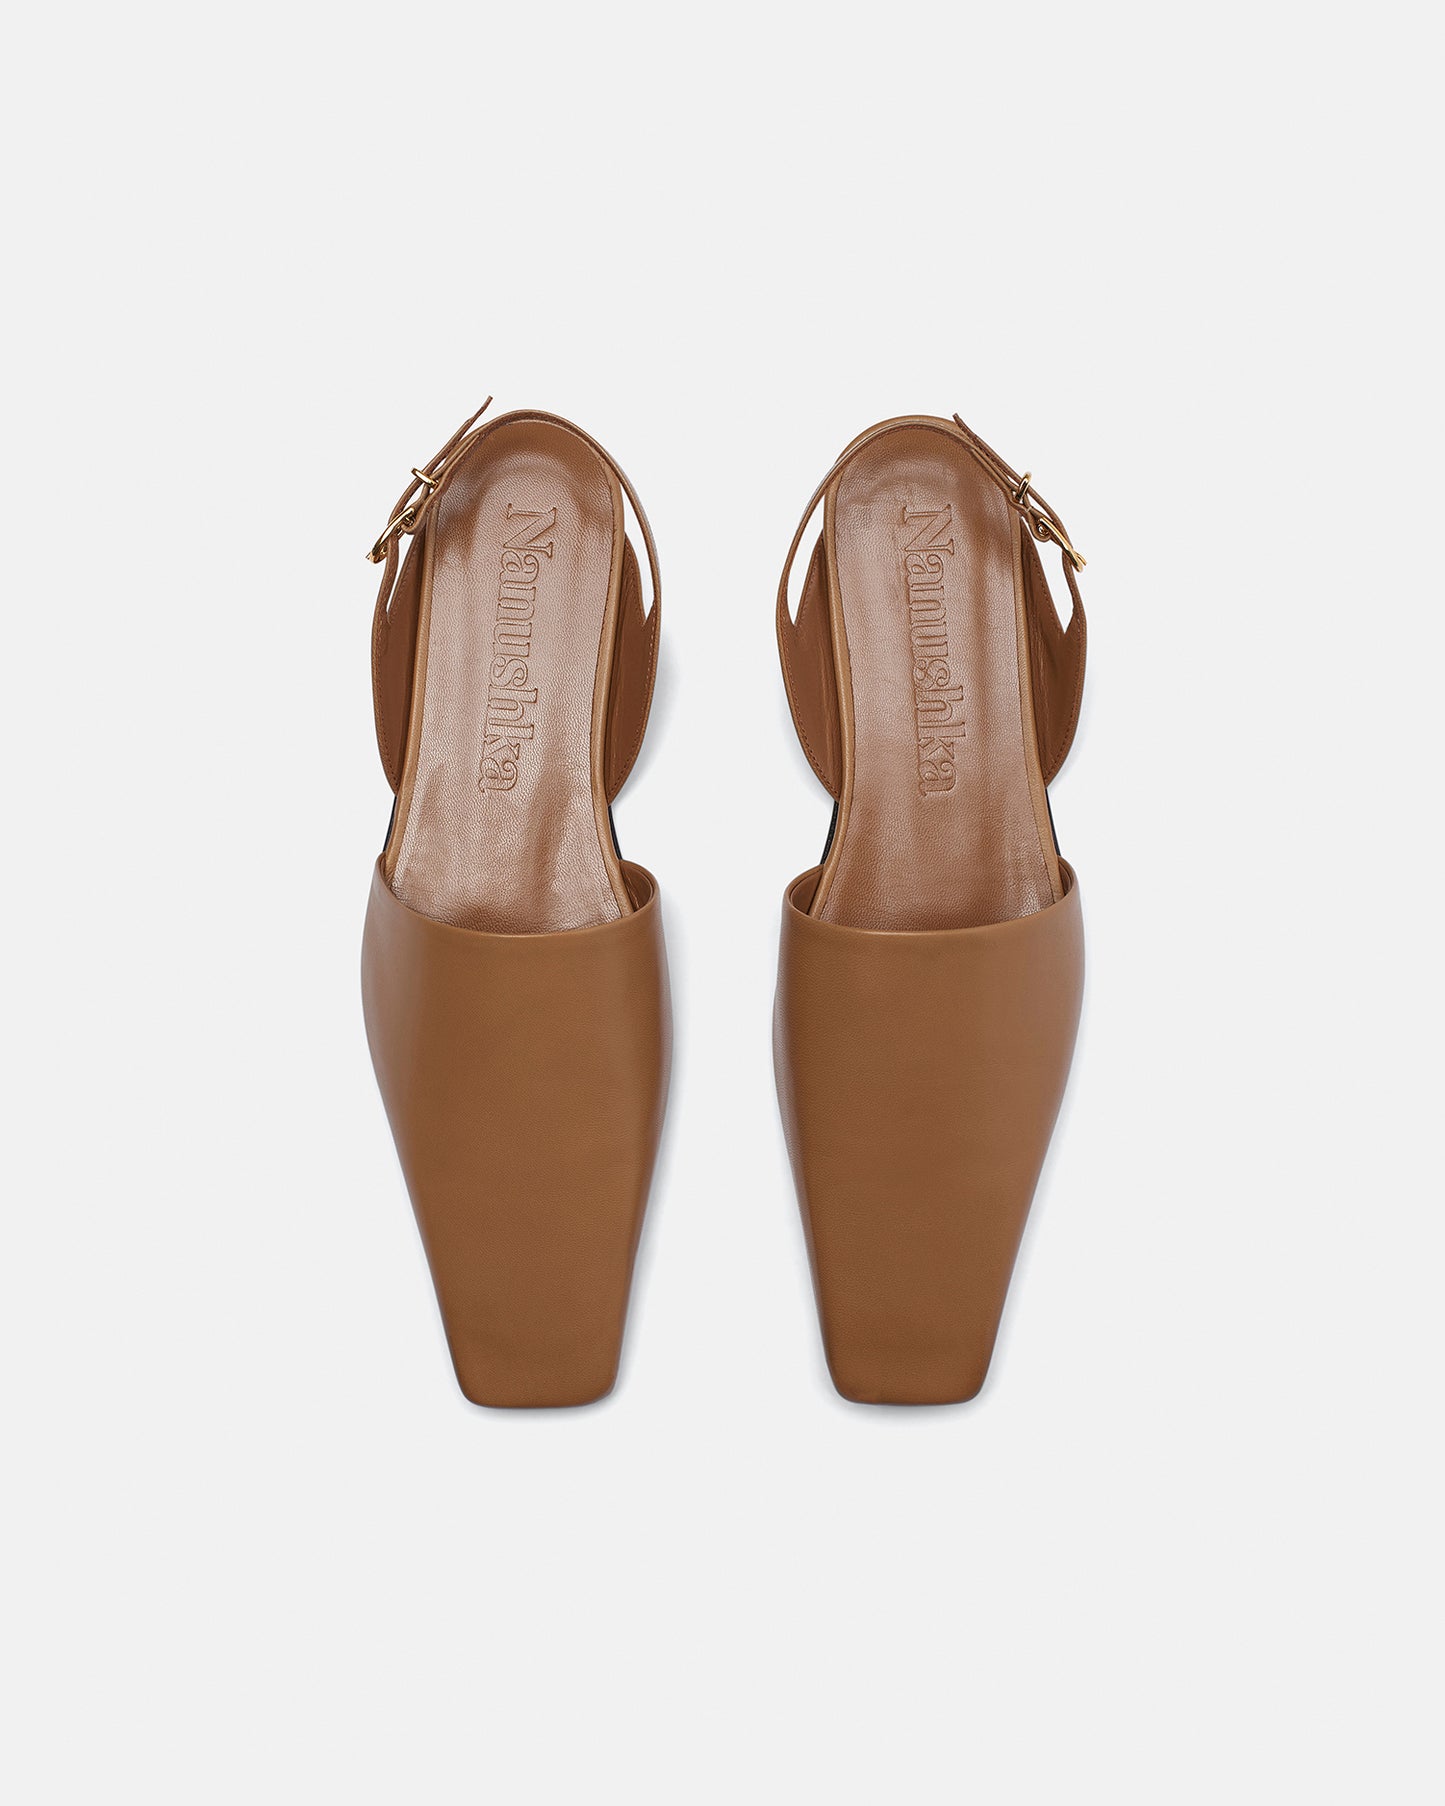 Maimu - Leather Point-Toe Flats - Nut Brown